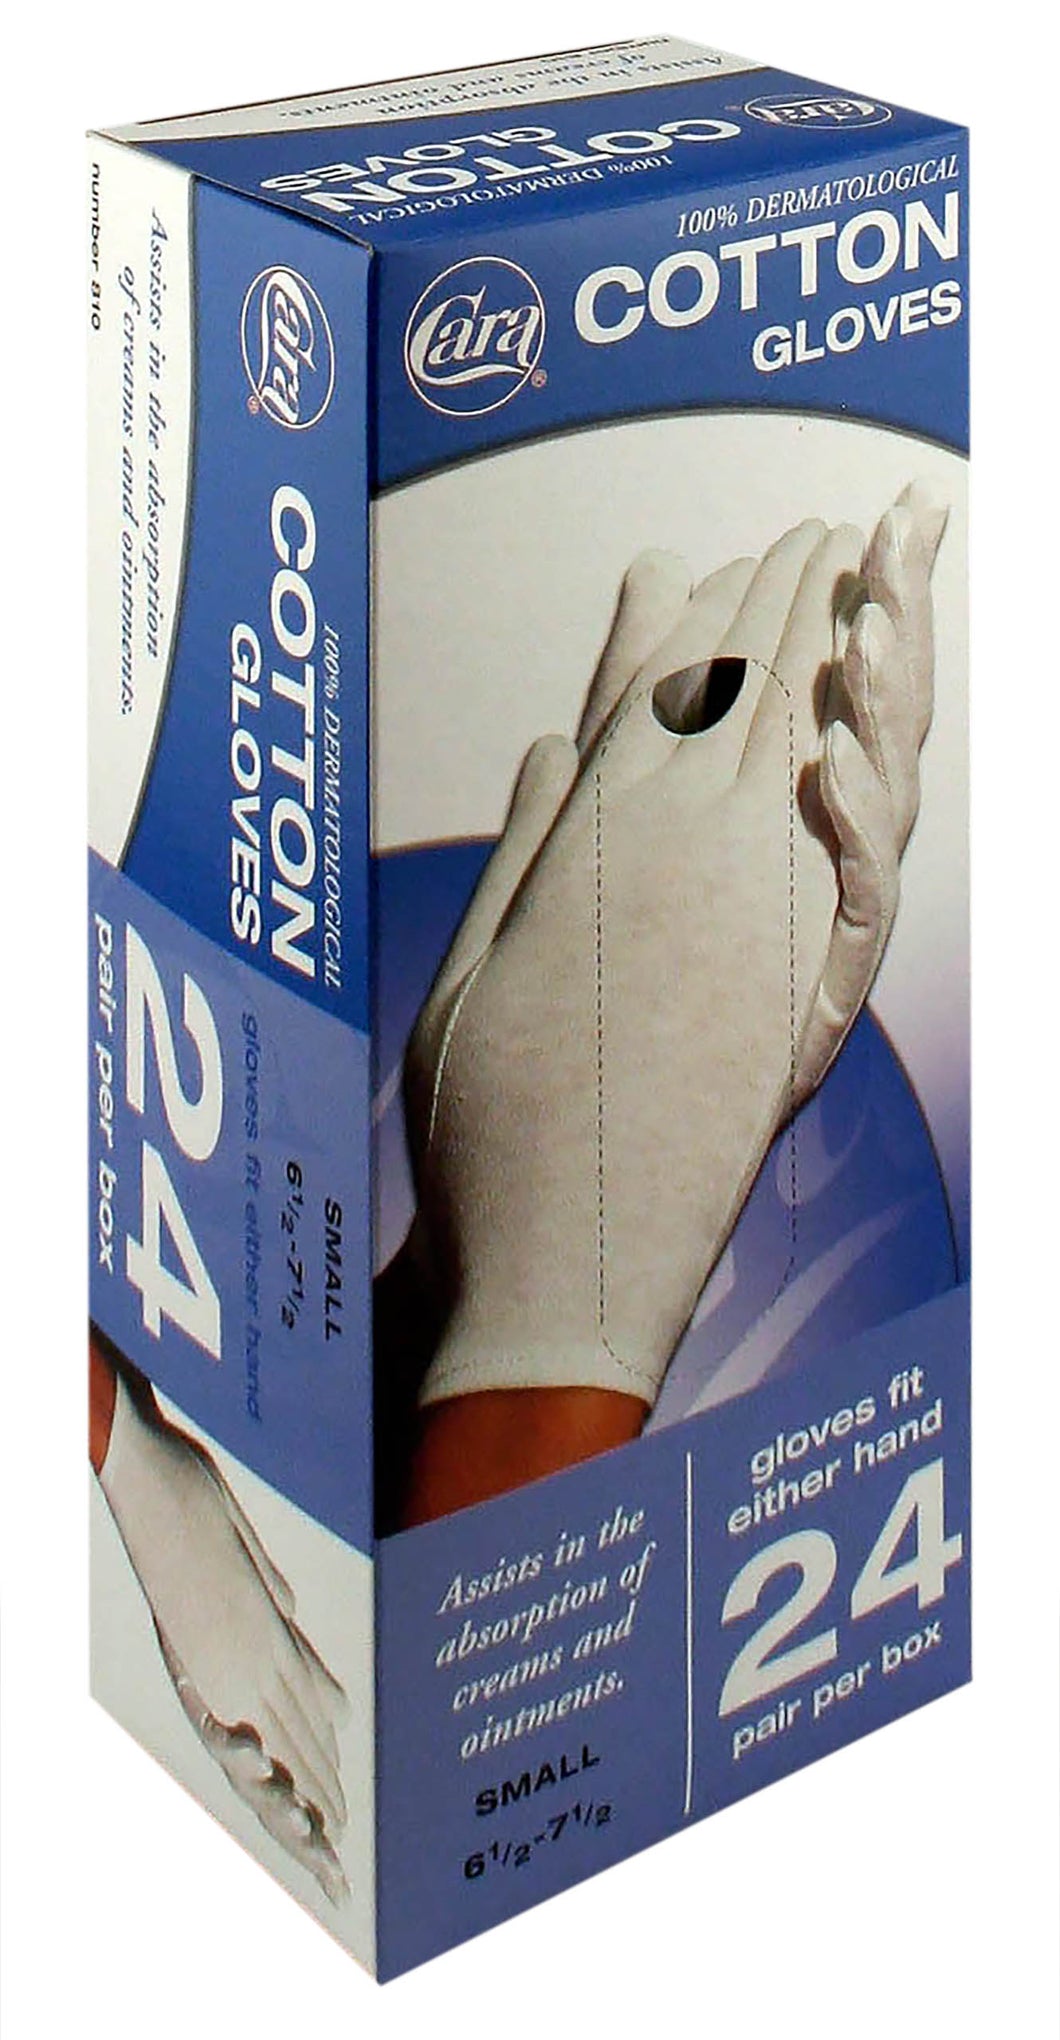 Model #810 - Dermatological Cotton Gloves, Small